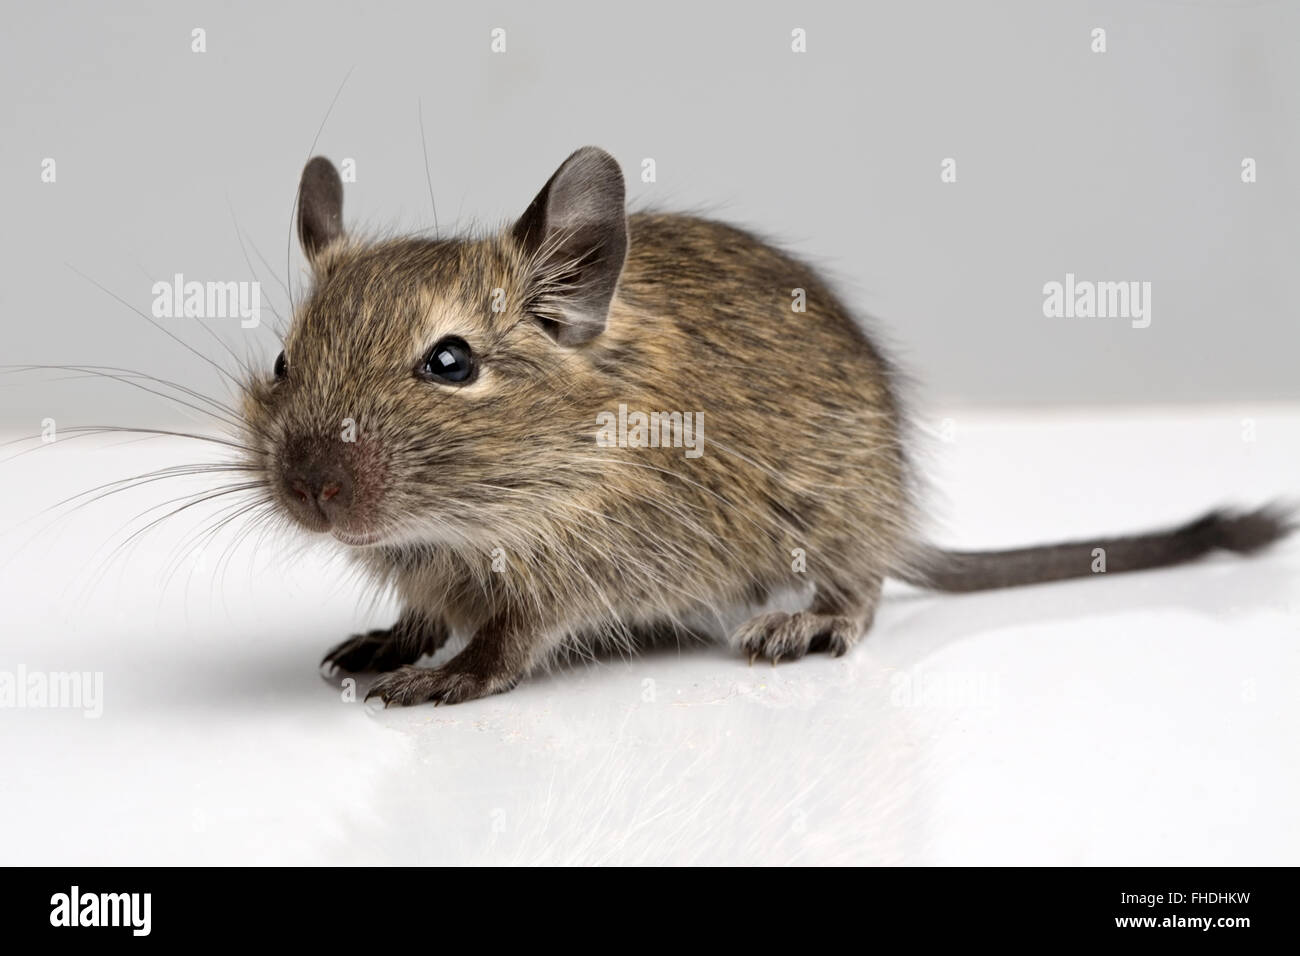 little baby rat profile full-sized closeup view on neutral background Stock Photo